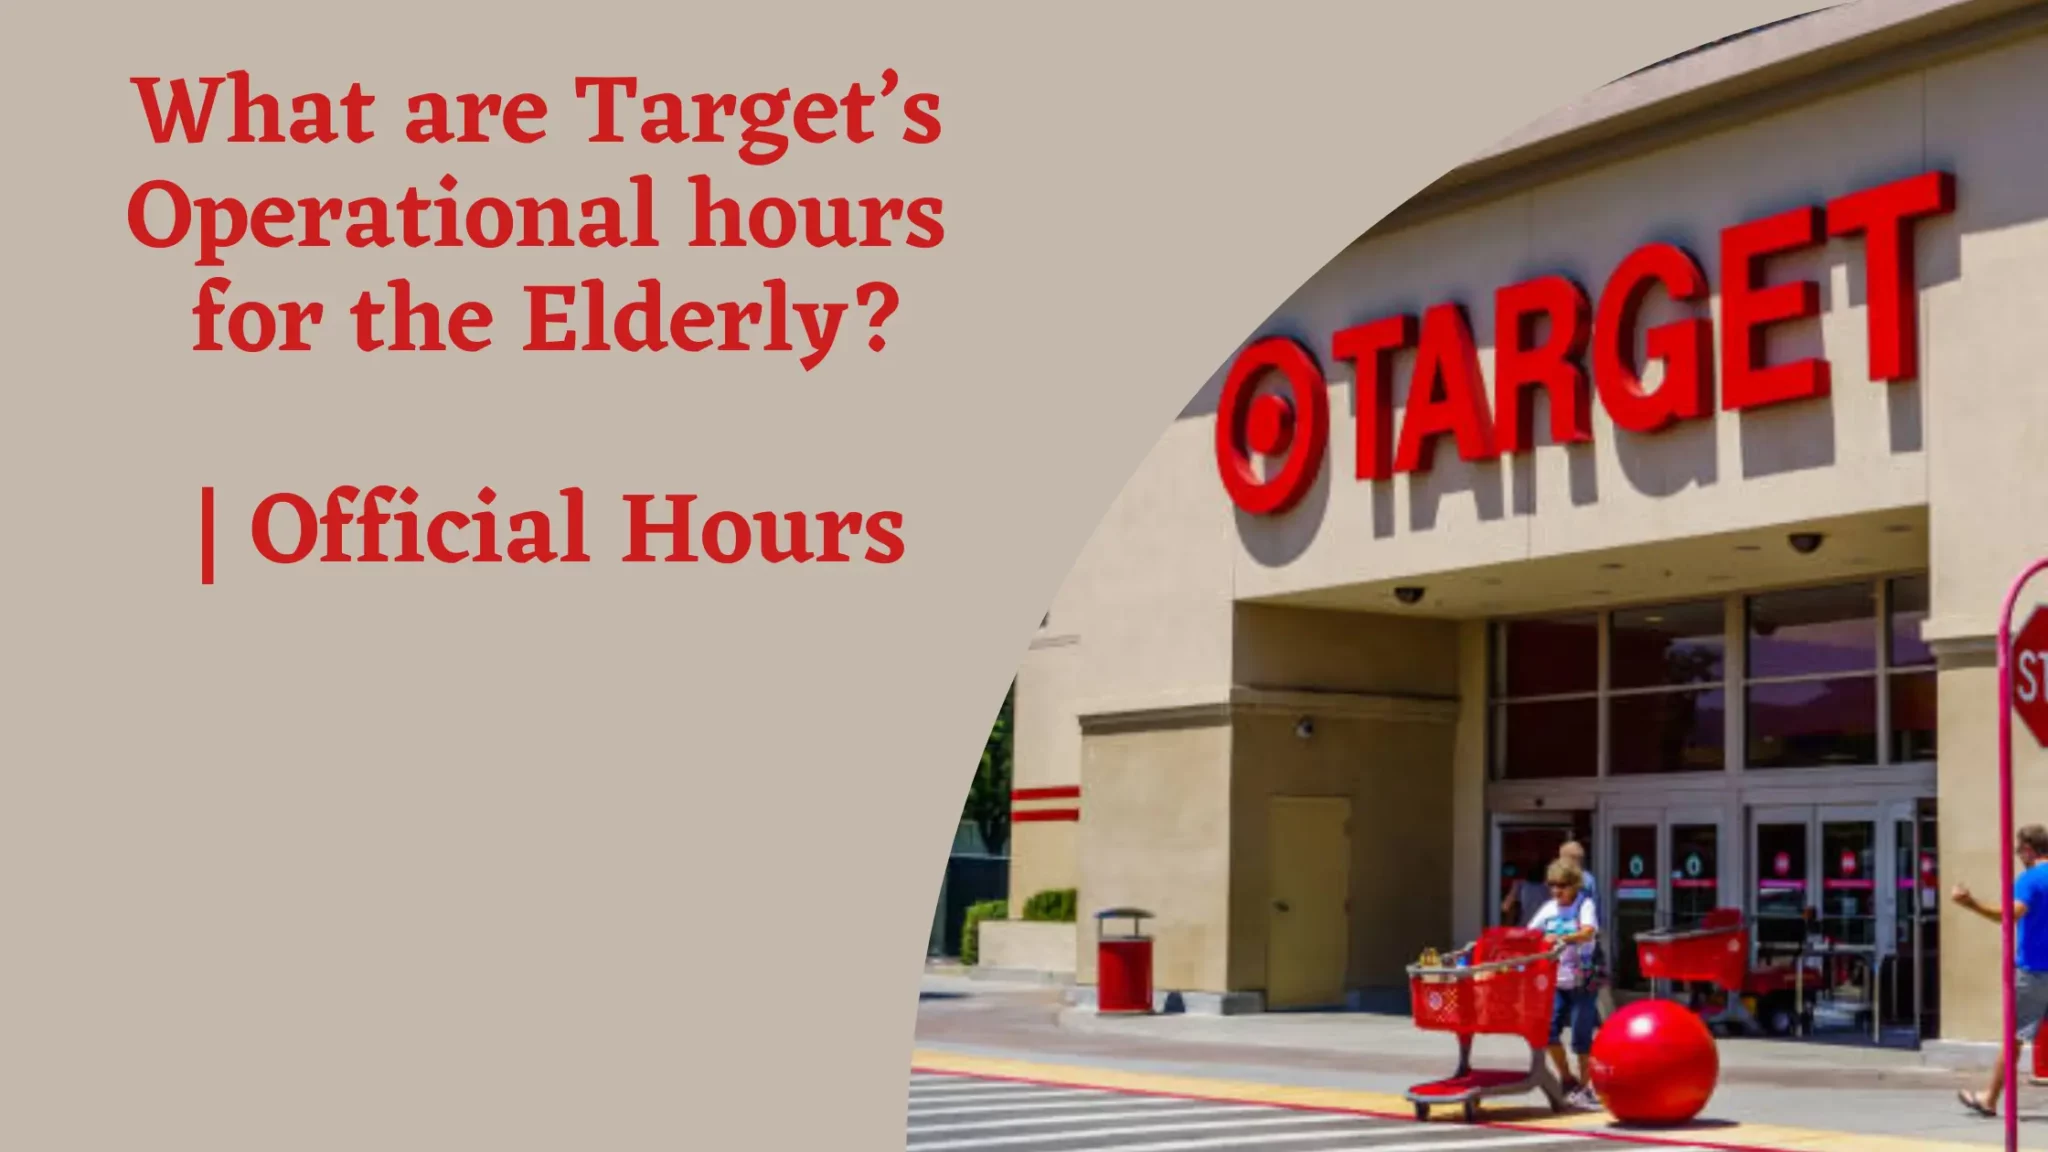 What are Target’s Operational hours for Elderly?